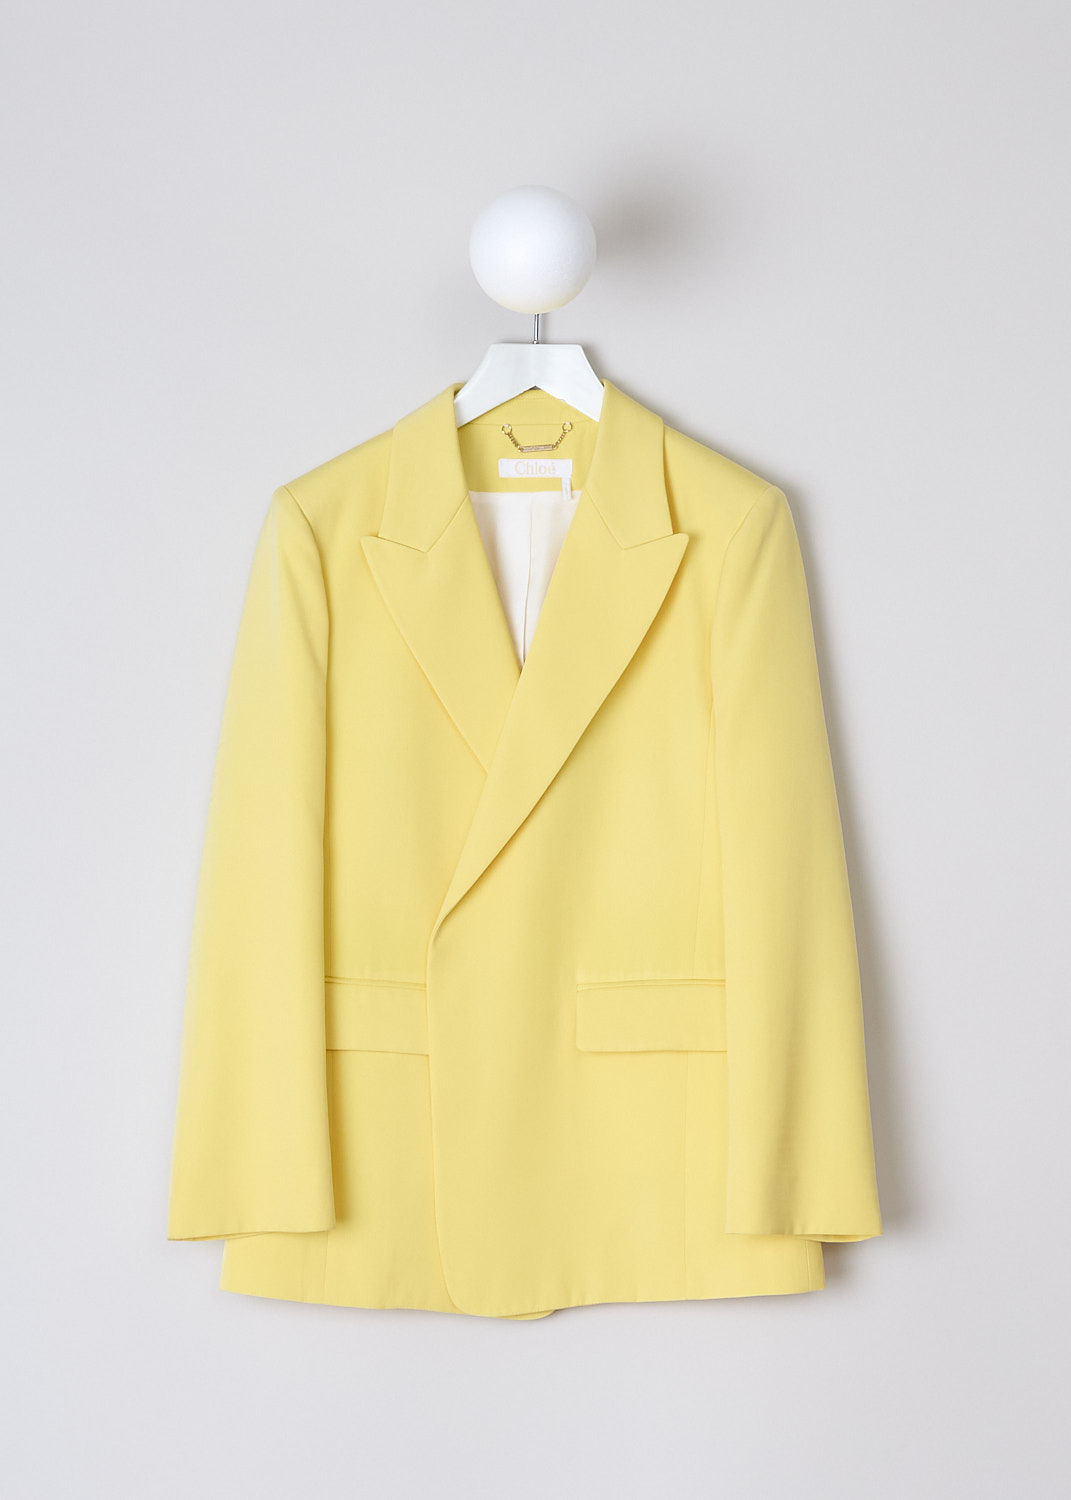 CHLOÉ, OPEN JACKET IN RADIANT YELLOW, CHC22UVE06015757_RADIANT_YELLOW, Yellow, Front, This Radiant Yellow jacket has a peaked lapel with an open front. On the front, the jacket has two flap welt pockets. In the back, the jacket has a centre vent. The jacket is fully lined and has an oversized silhouette. 
